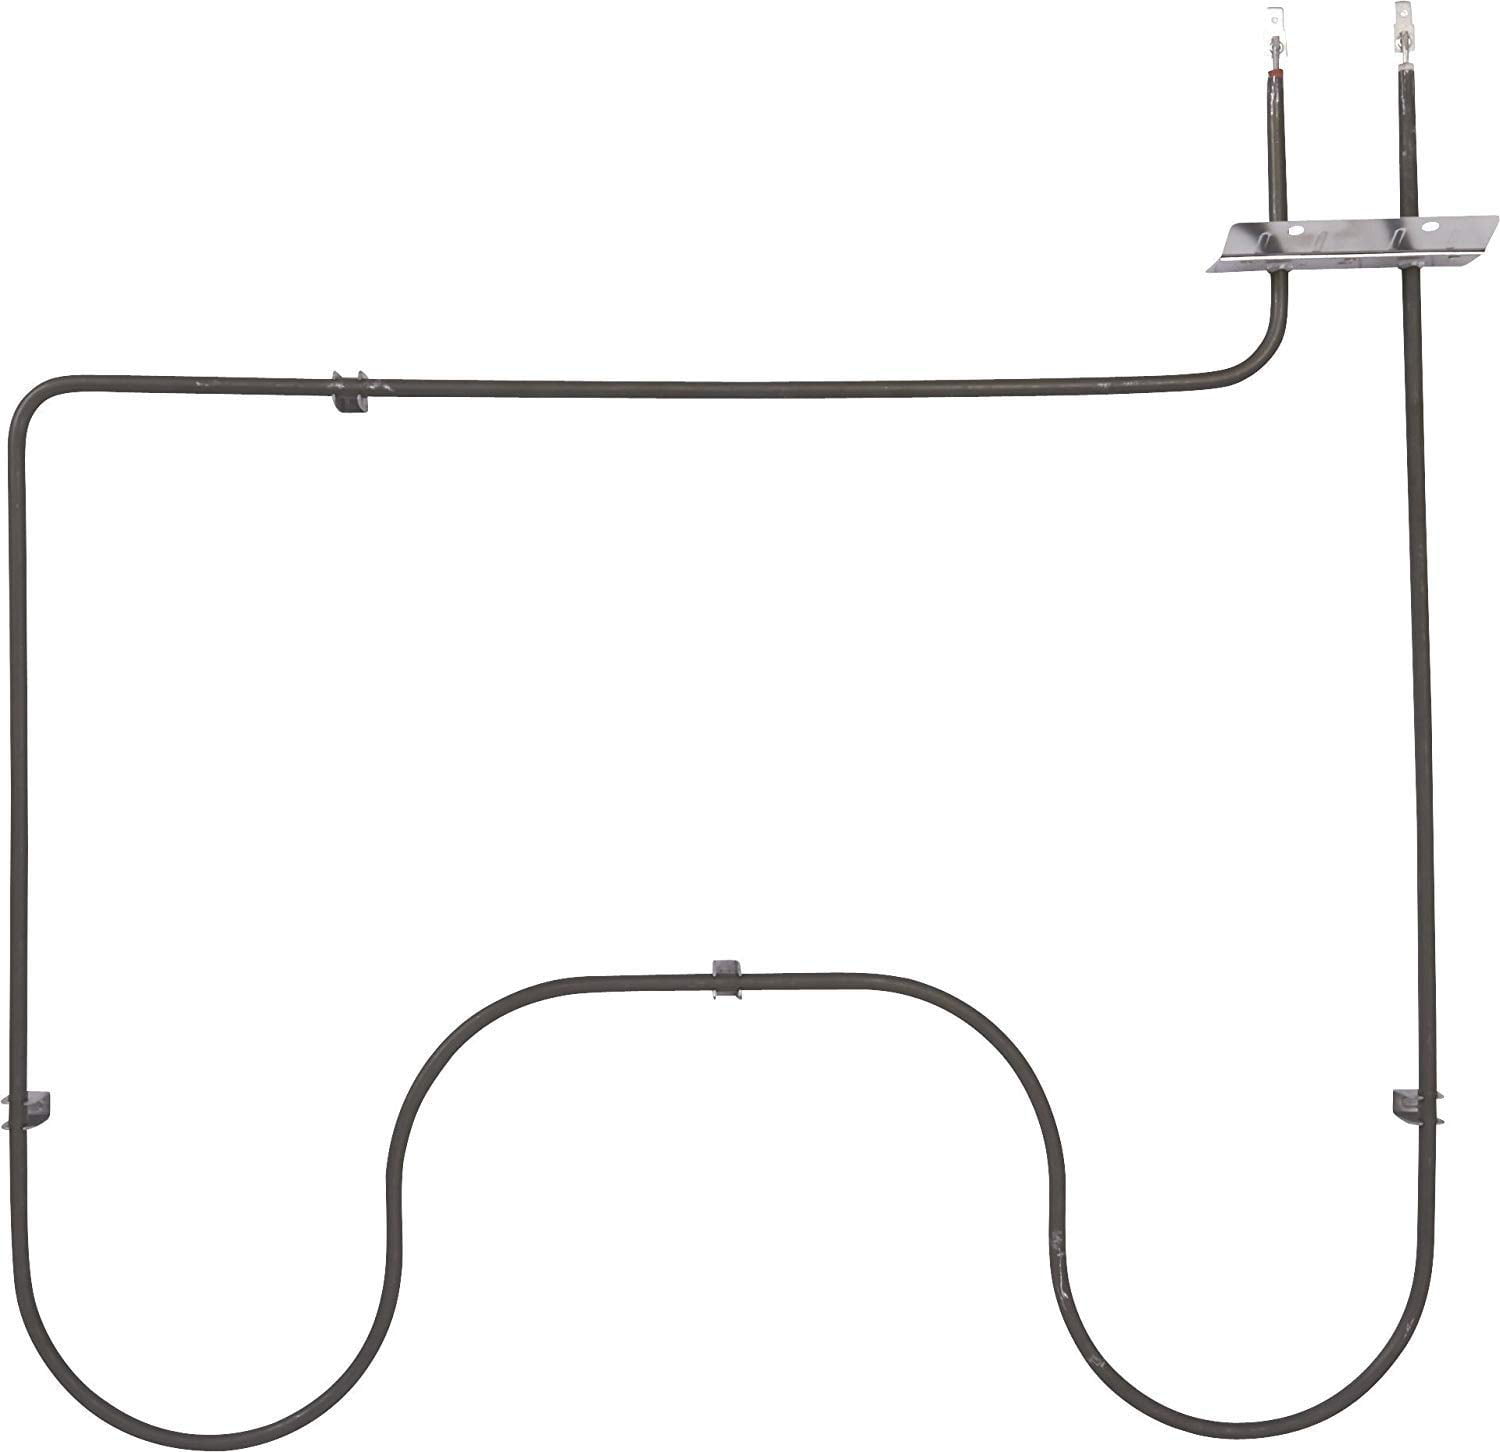 Oven Heating Element Replaces Maytag 74004107 7406P428-60 